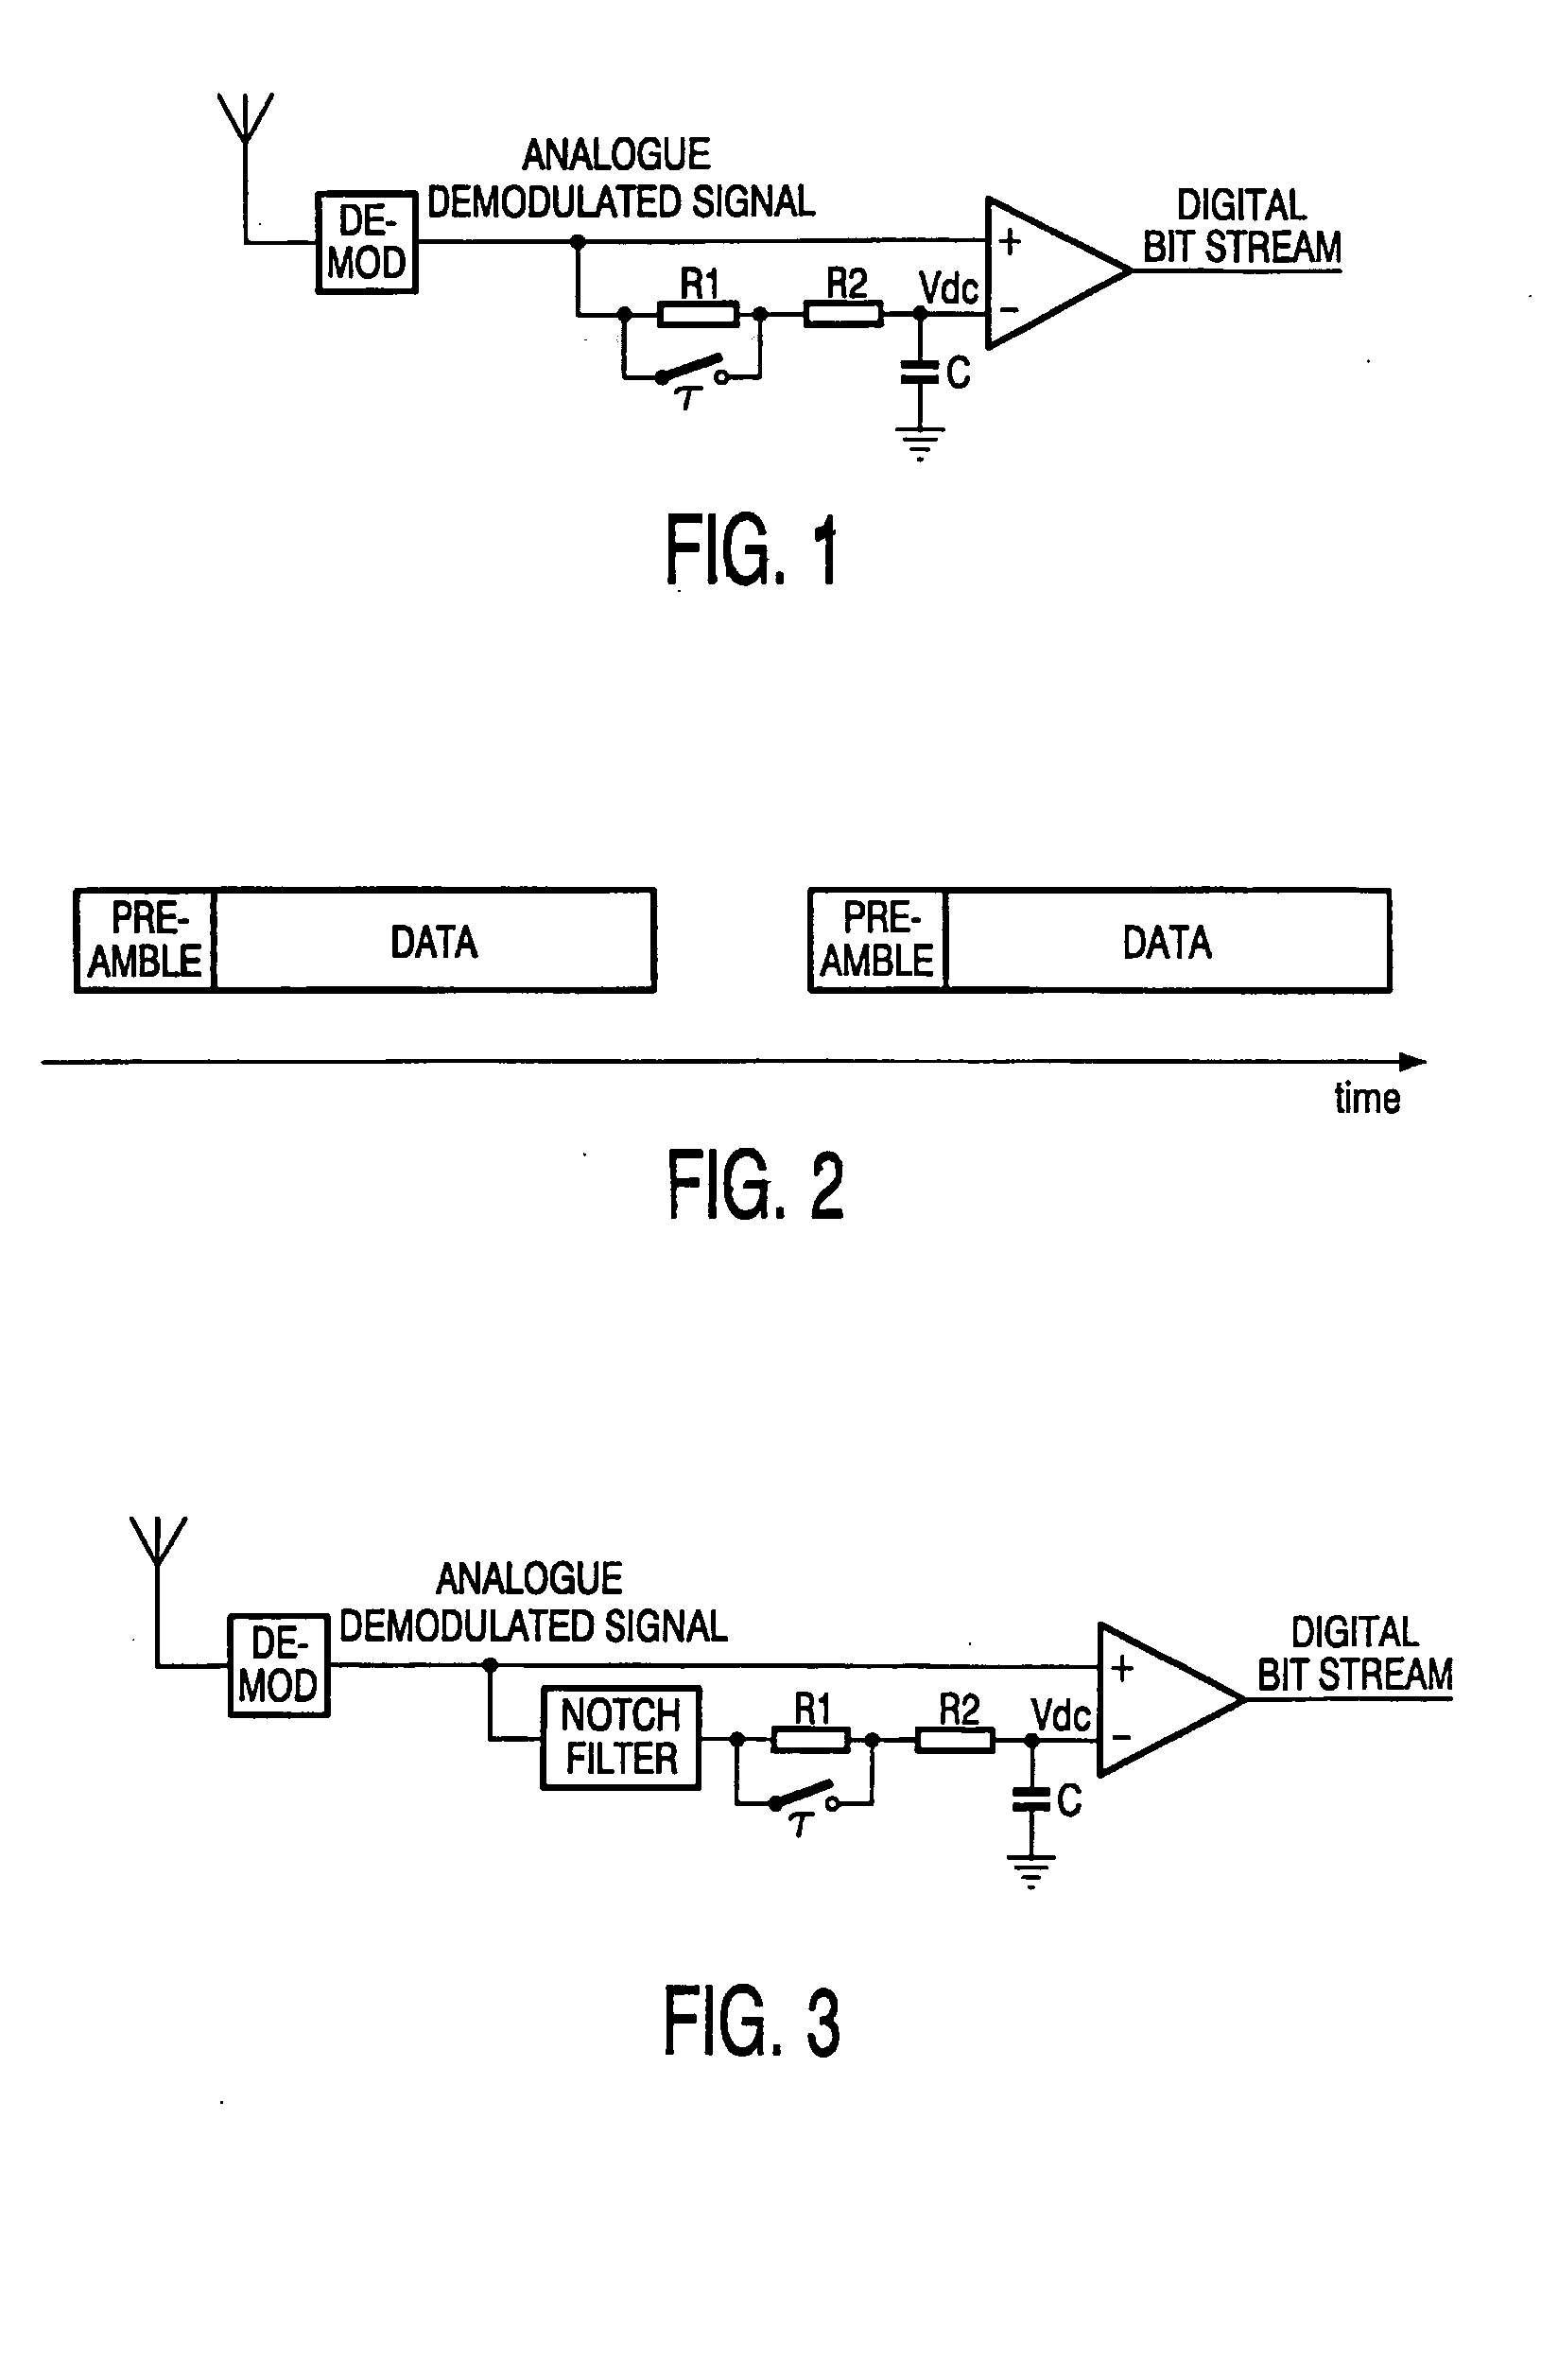 Fast settling data slicer comprising a low-pass filter with switchable cut-off frequency and a notch-filter